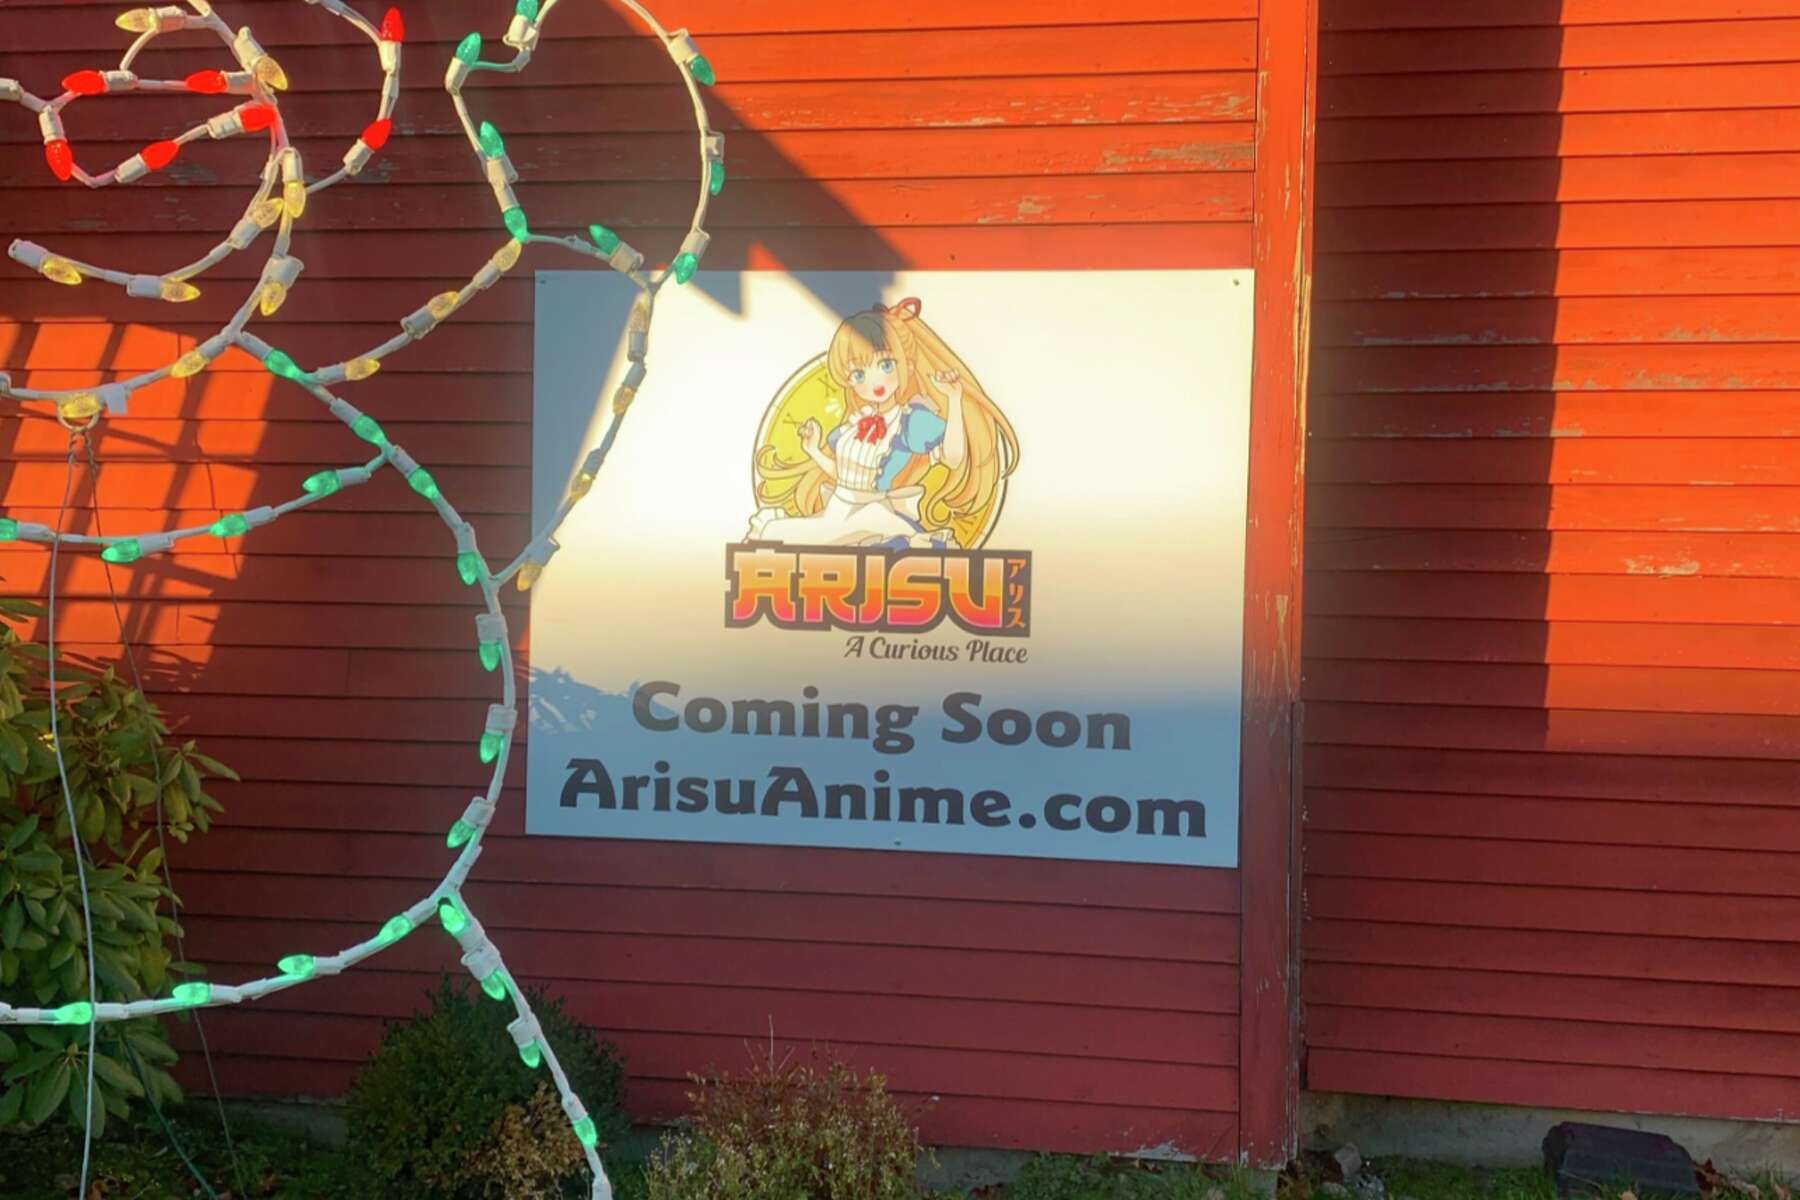 Immersive Fun For Everyone! New Anime Store Announced by Alice in